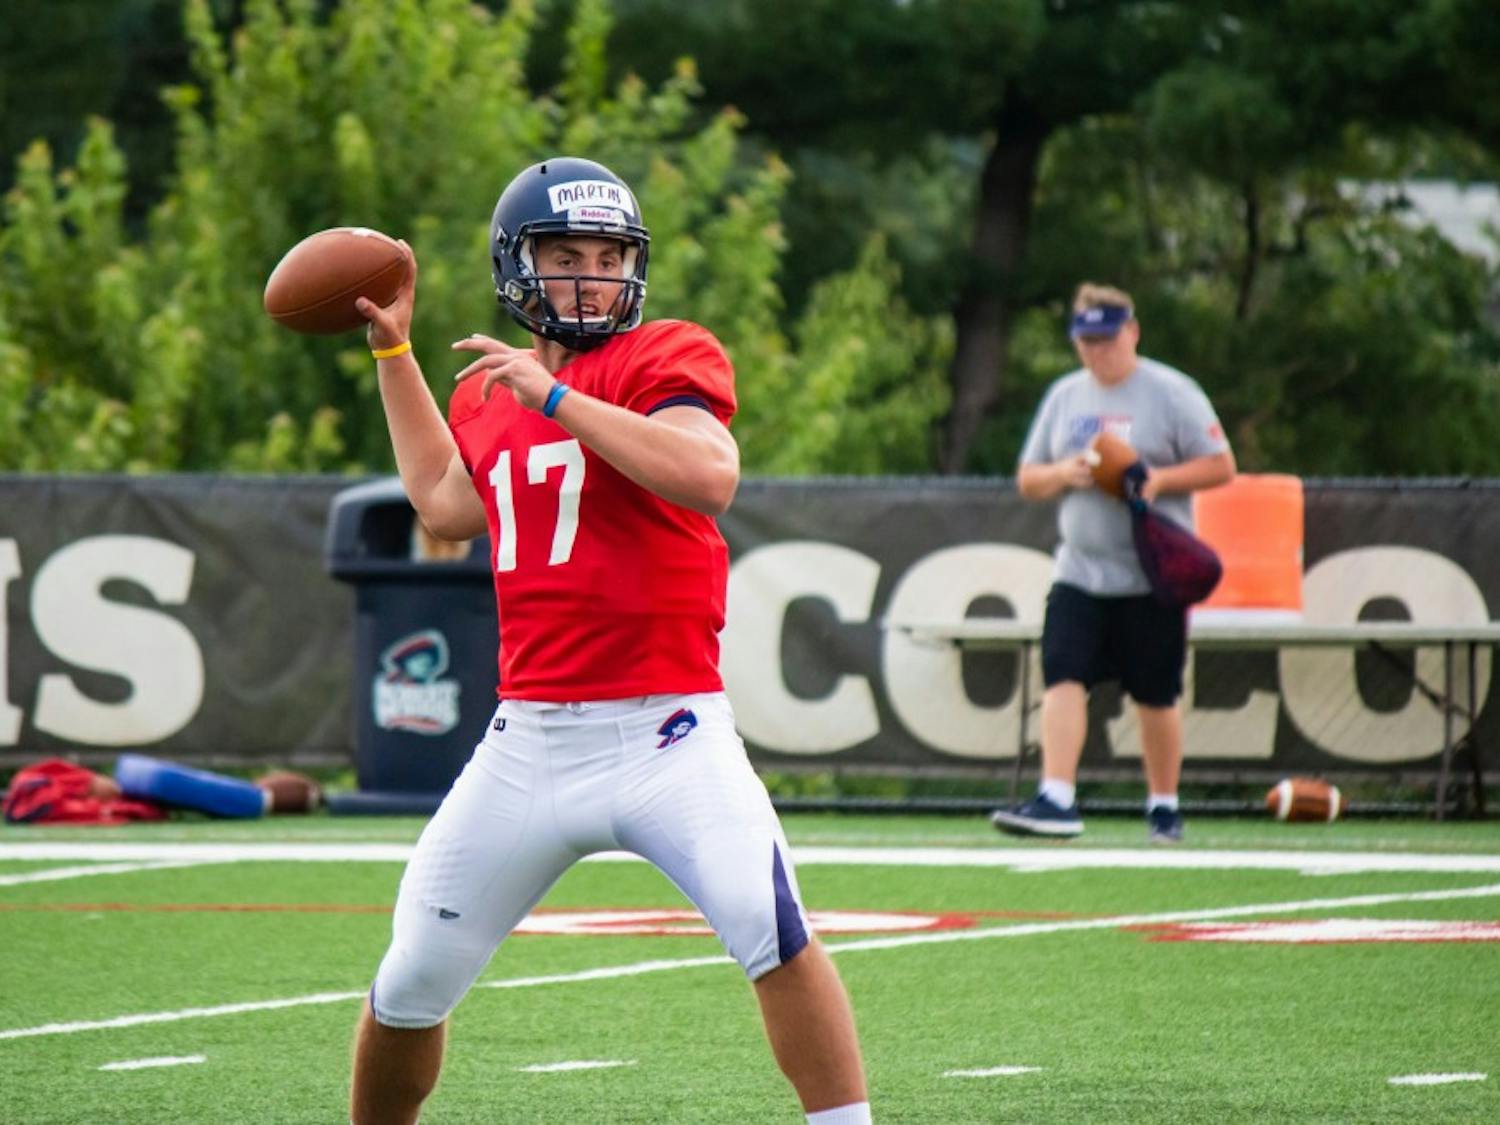 QB George Martin winds up for a pass during the Colonials’ training camp in 2017.